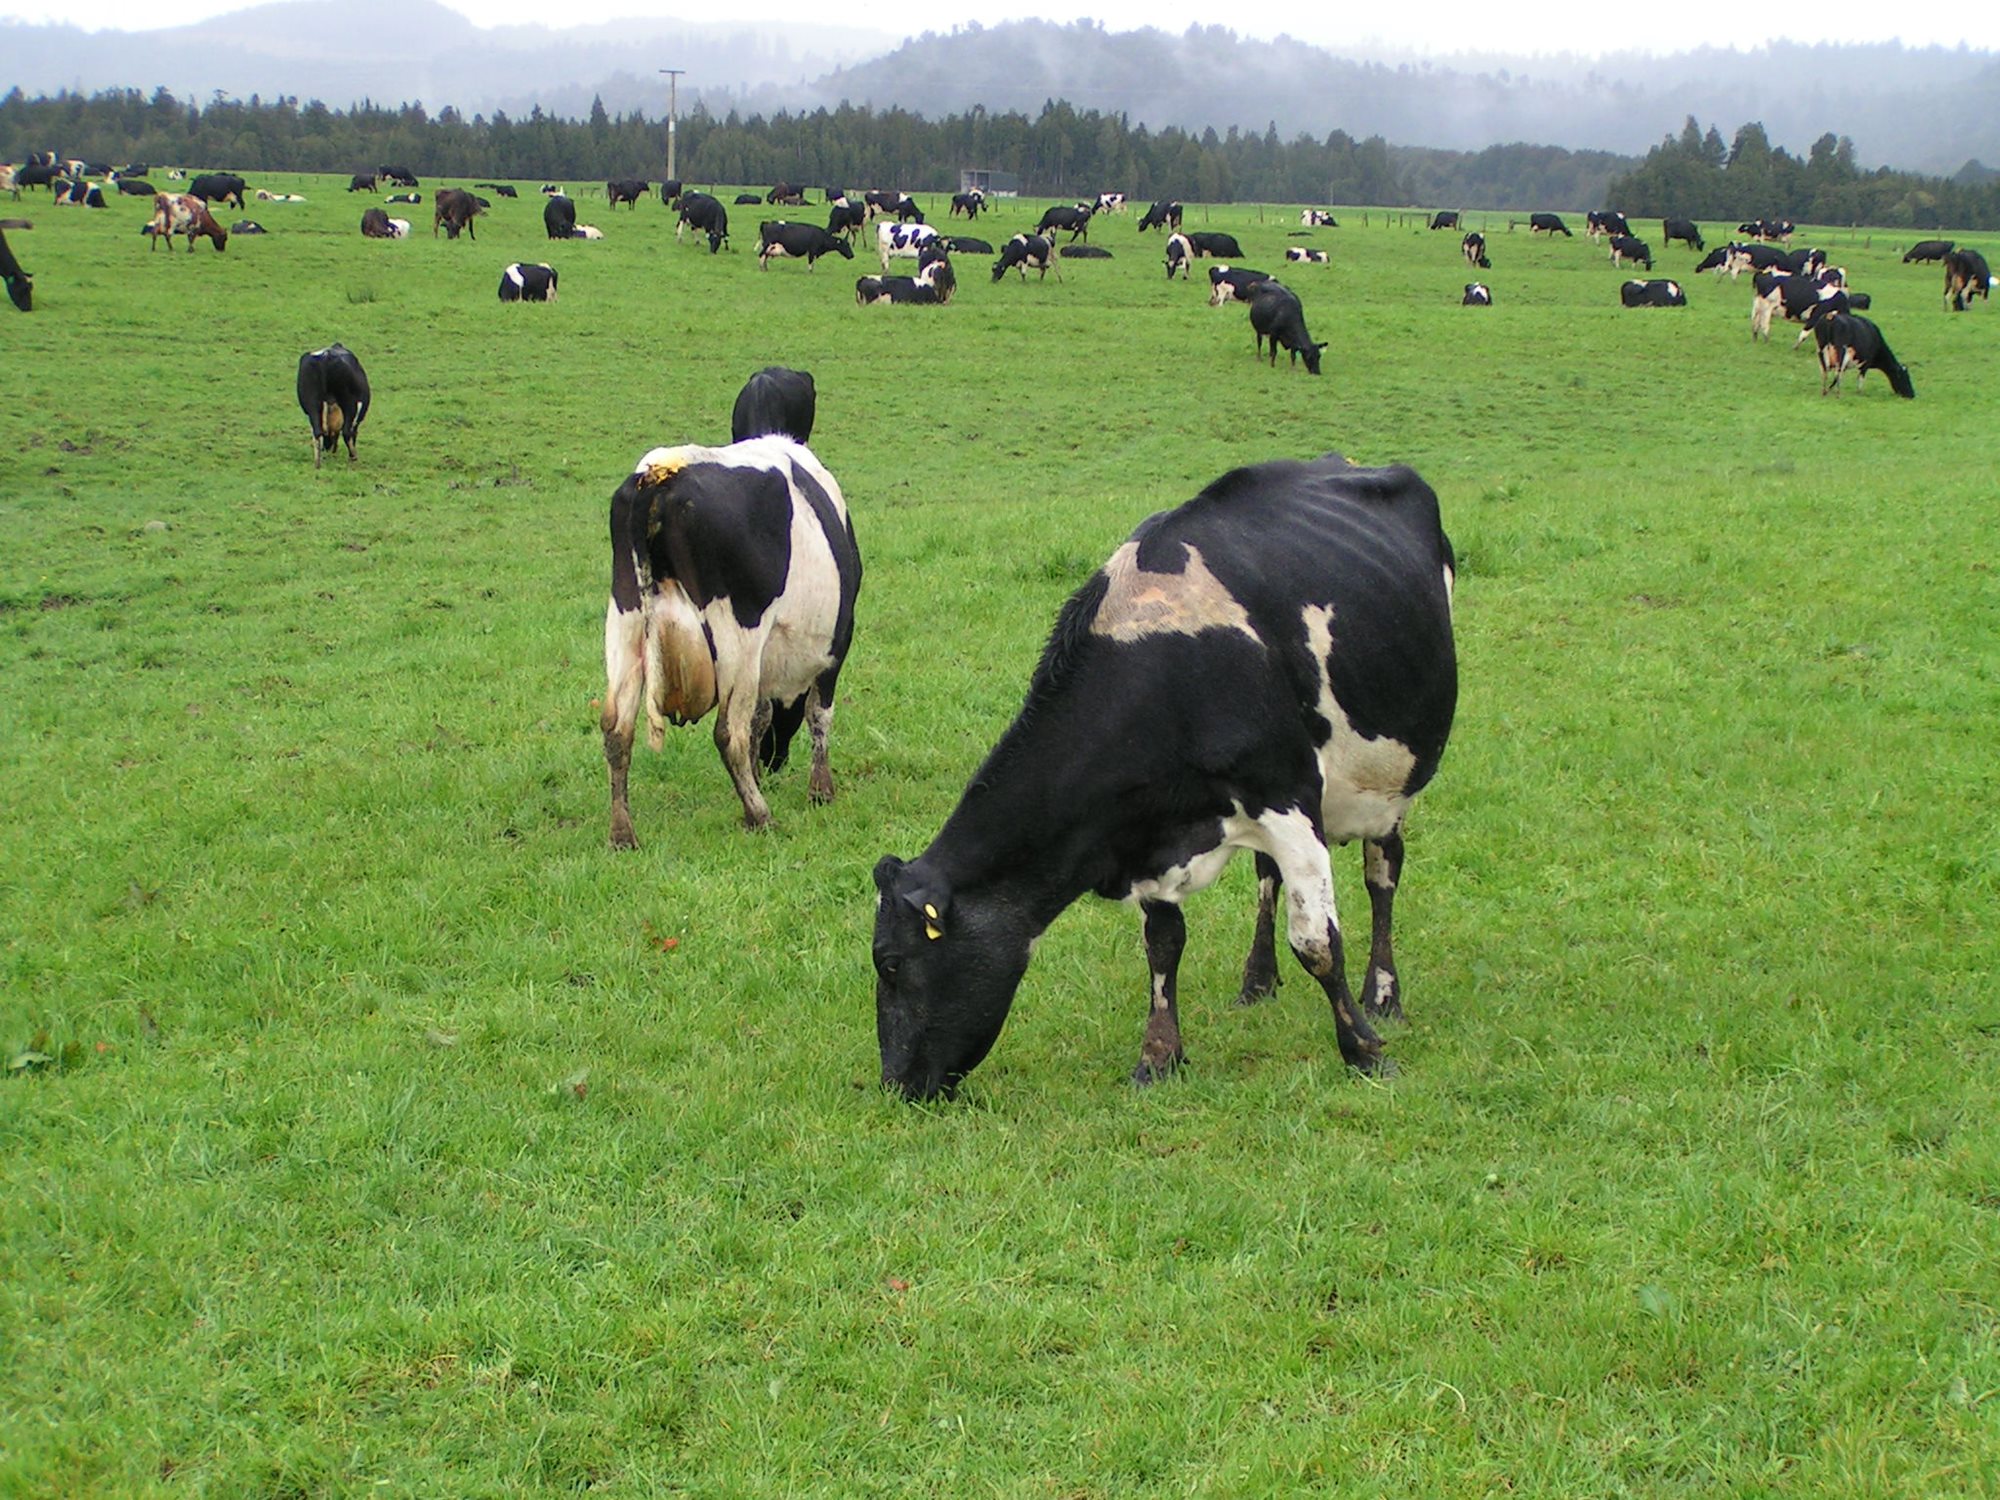 Heat stress in dairy cows and yeast